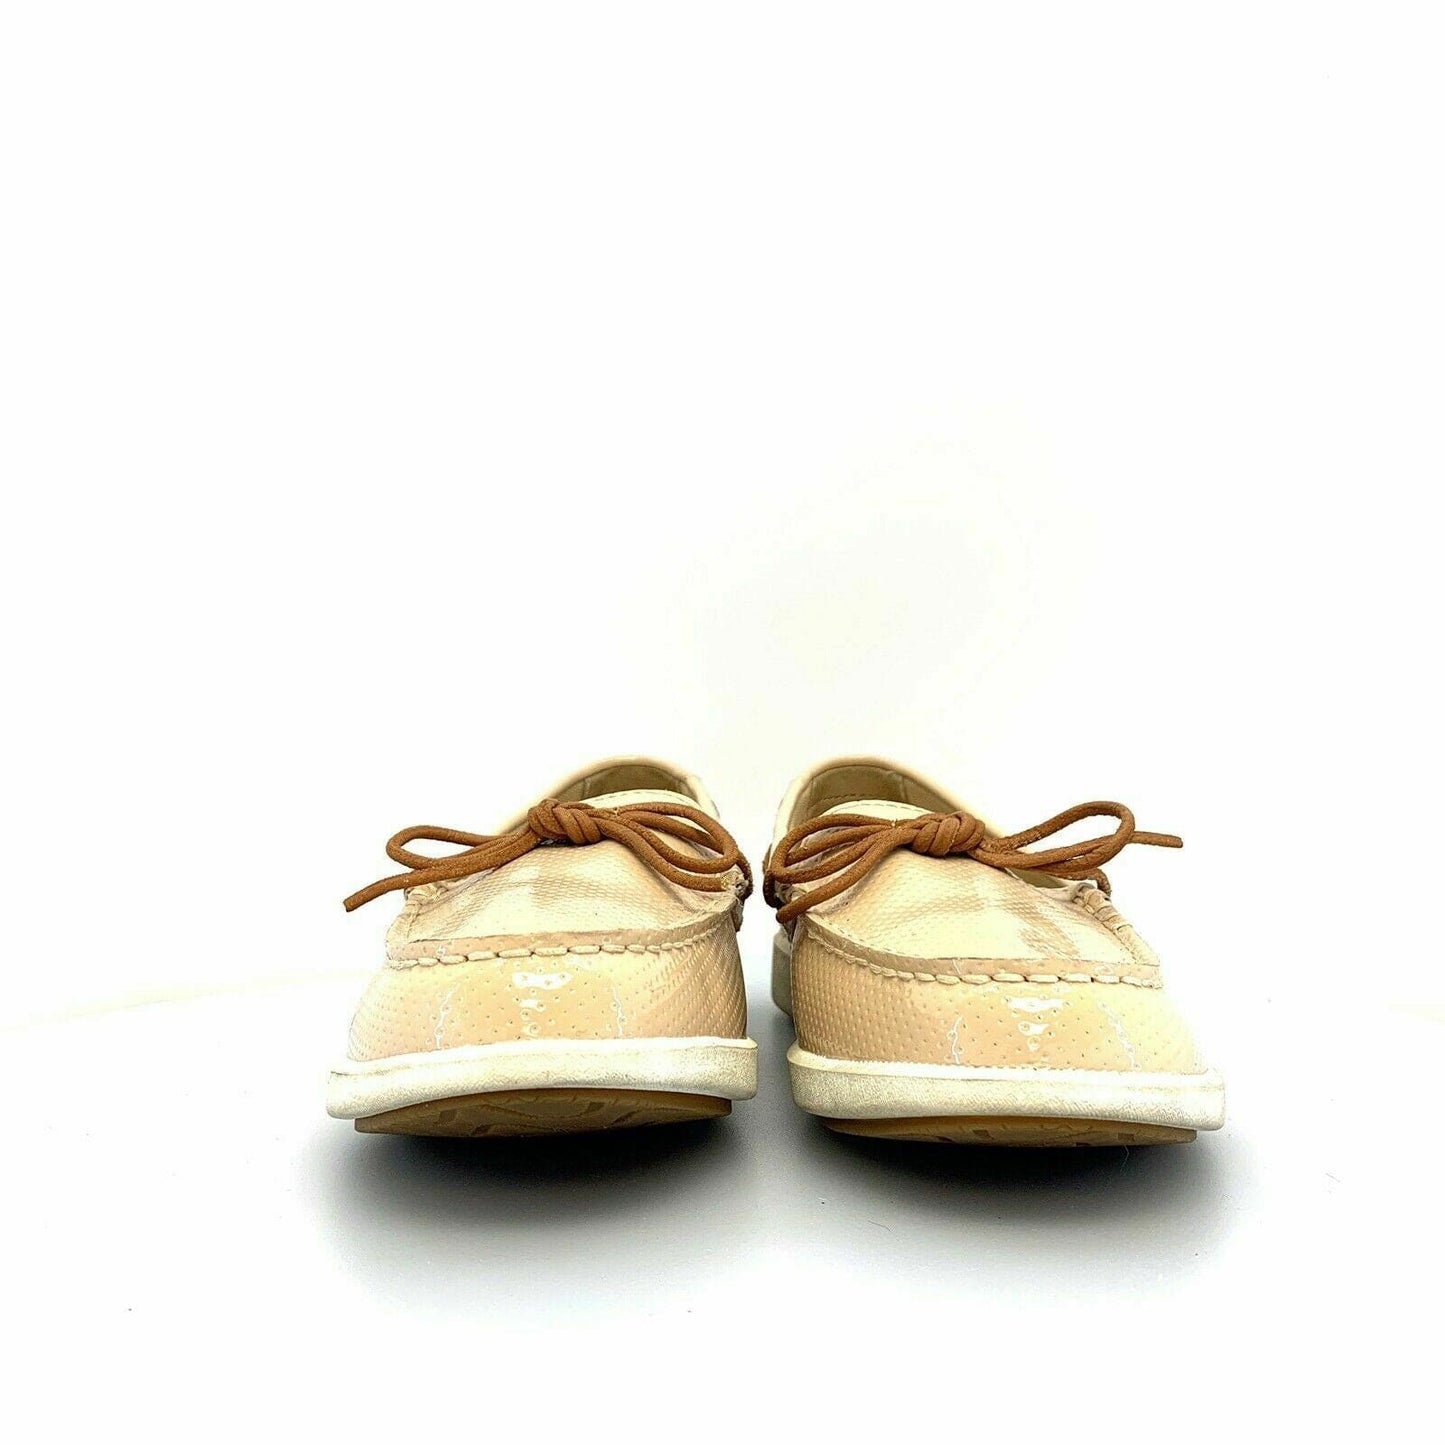 SPERRY Top-Sider Womens Size 9.5M Beige Cream Boat Shoes Textured Patent Leather